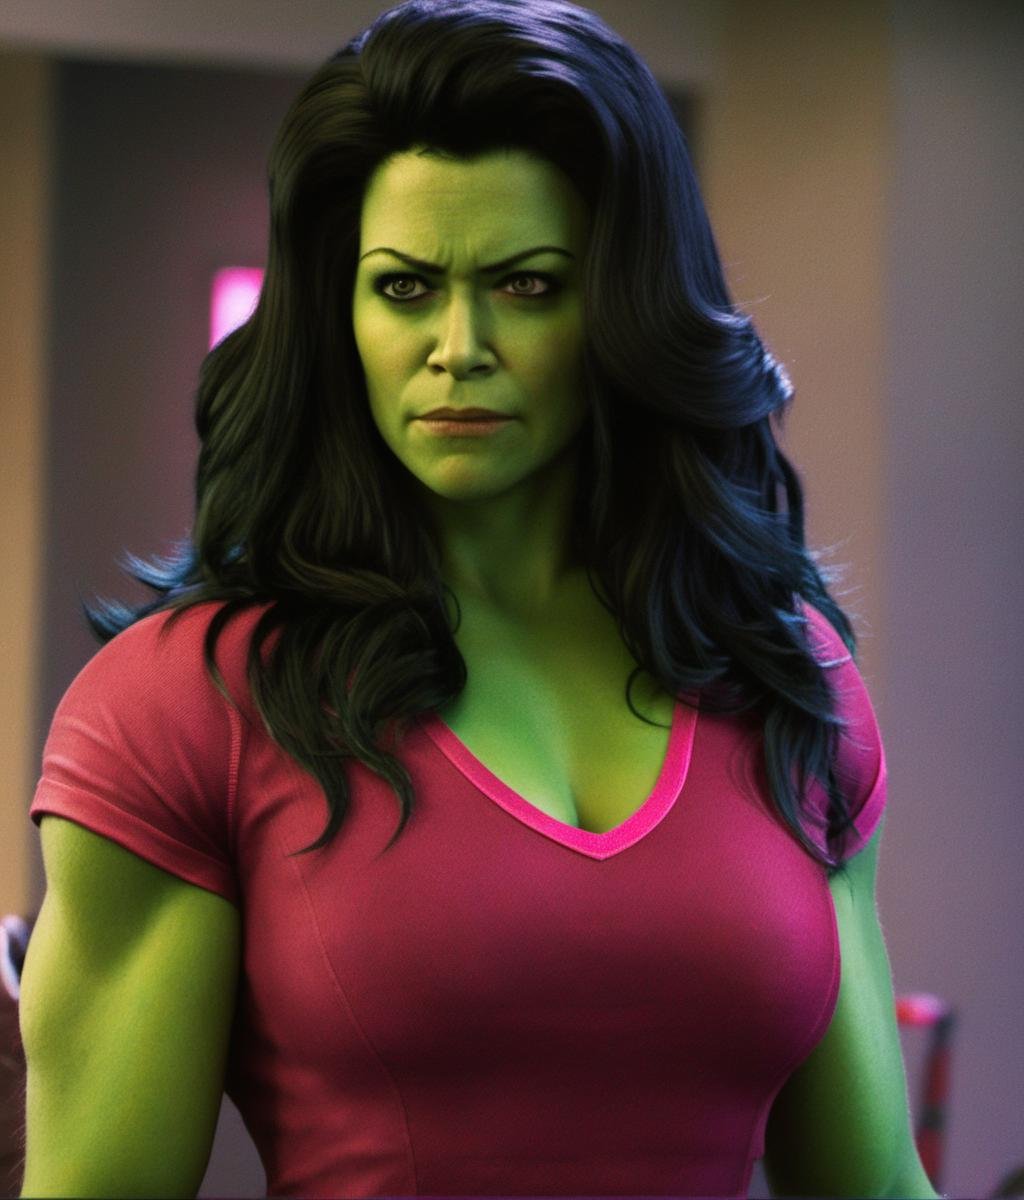 ((big cleavage:1.8)), big cleavage, big cleavage, big cleavage, A full-body depiction of angry ohwx woman, green skin, Full-body depiction, ((ample big cleavage:1.4, generous big breasts:1.5)), alluring low neck pink tshirt, strategically low neck to show cleavage, captivating seductive smile, hair elegantly tied back, impressive seductive sexy expression, enchanting sultry gaze looking at the viewer. <lora:SHEHULK_SDXL-000005:0.75> 